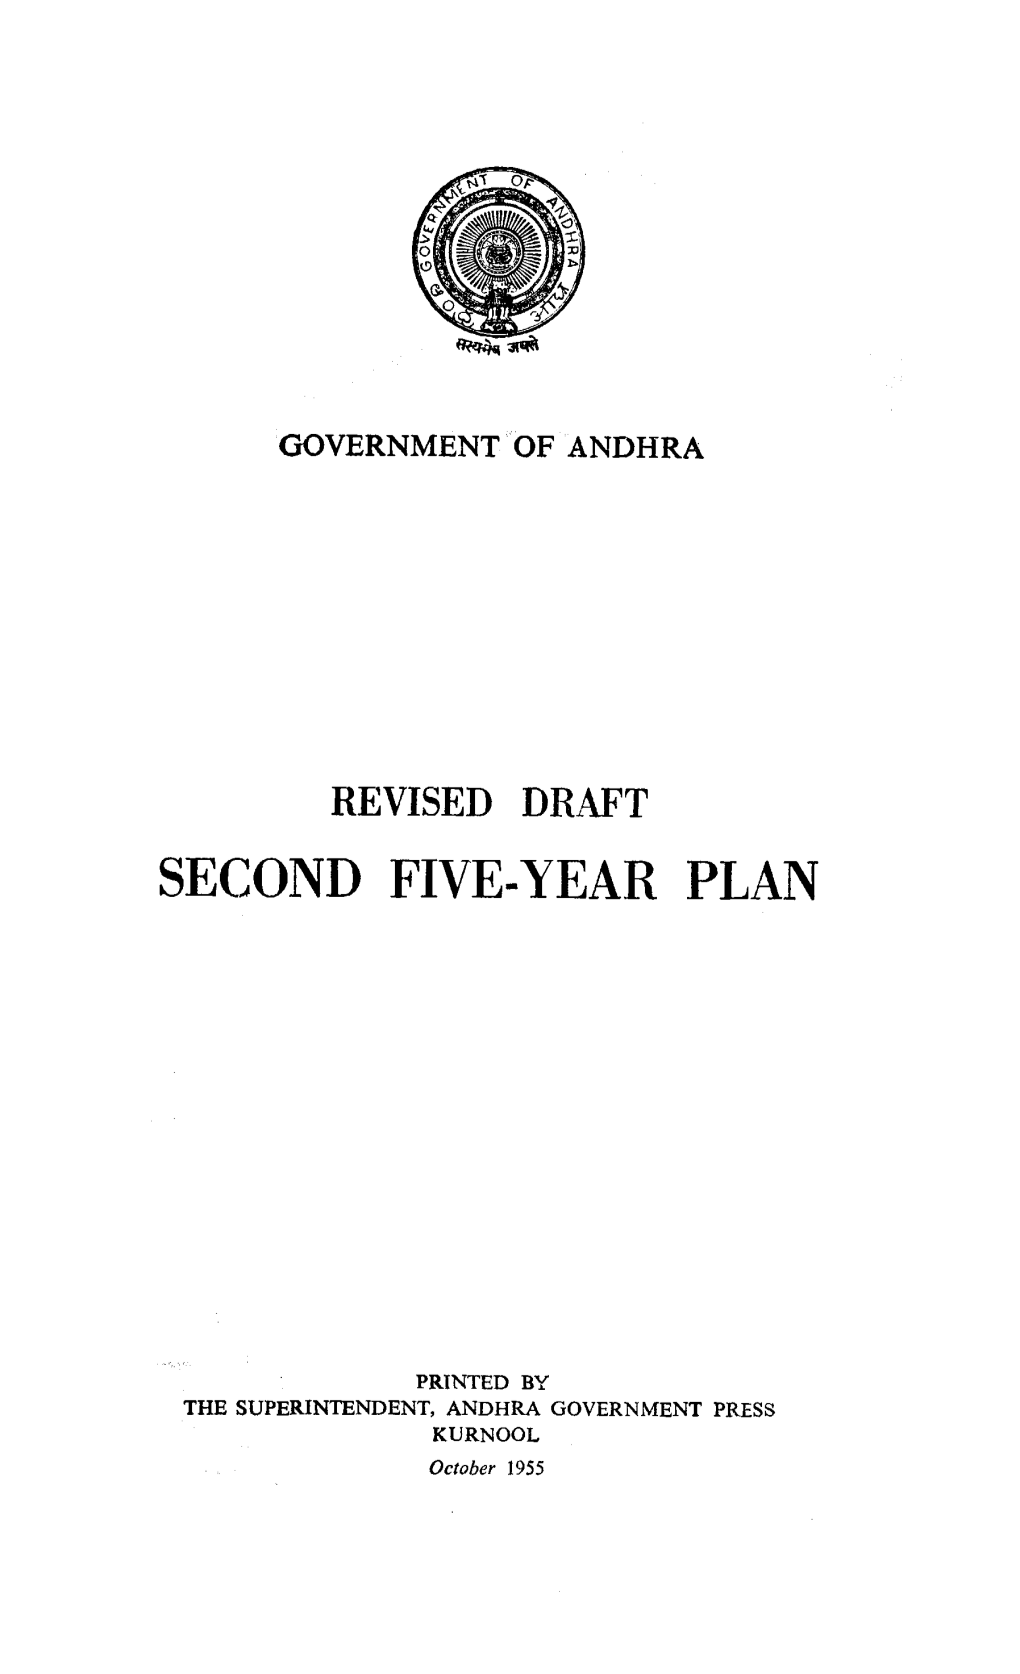 Second Five-Year Plan